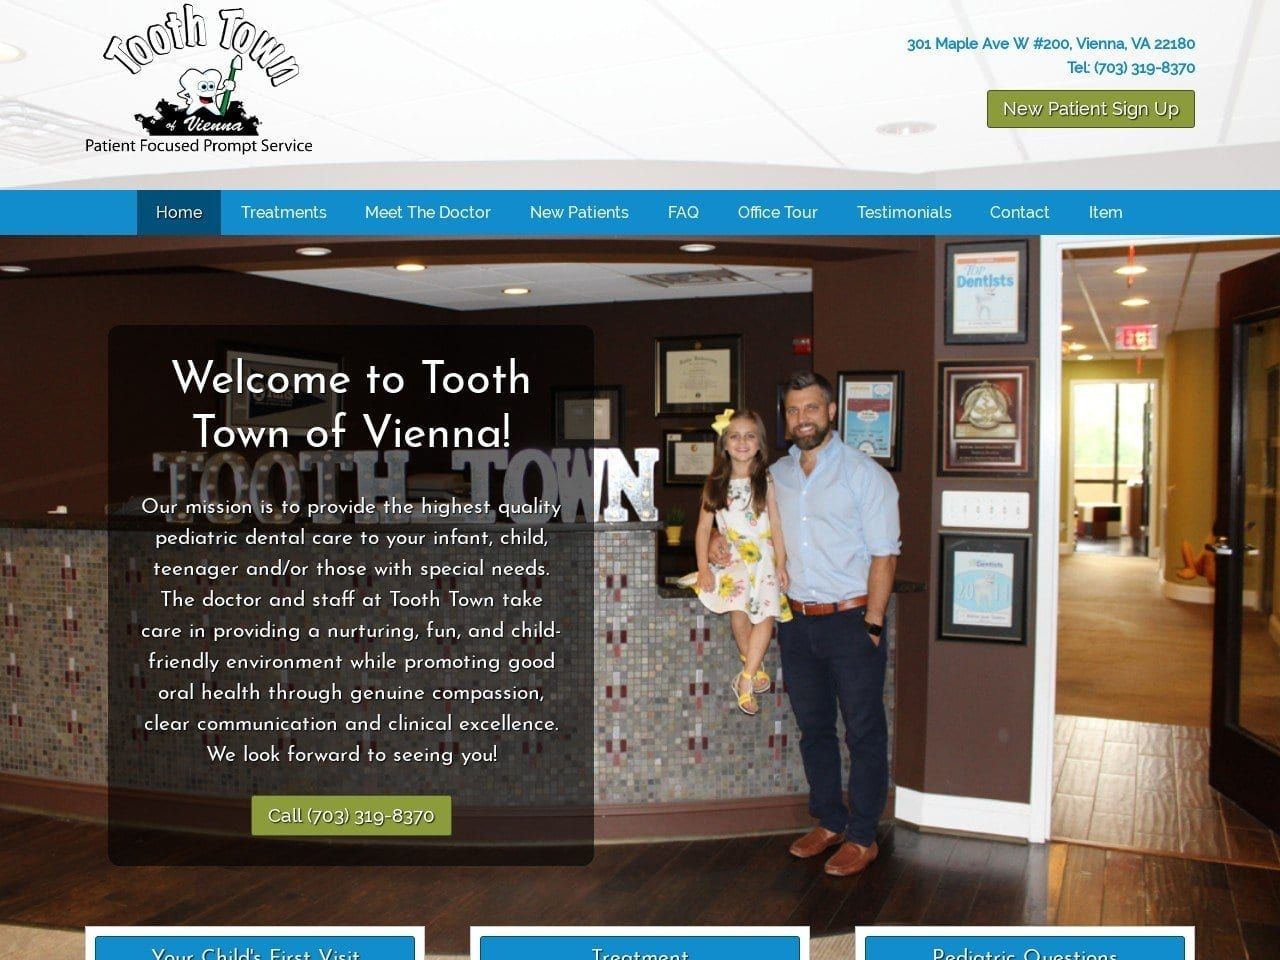 Tooth Town of Vienna Andrew Jason Shannon DMD Website Screenshot from toothtownofvienna.com